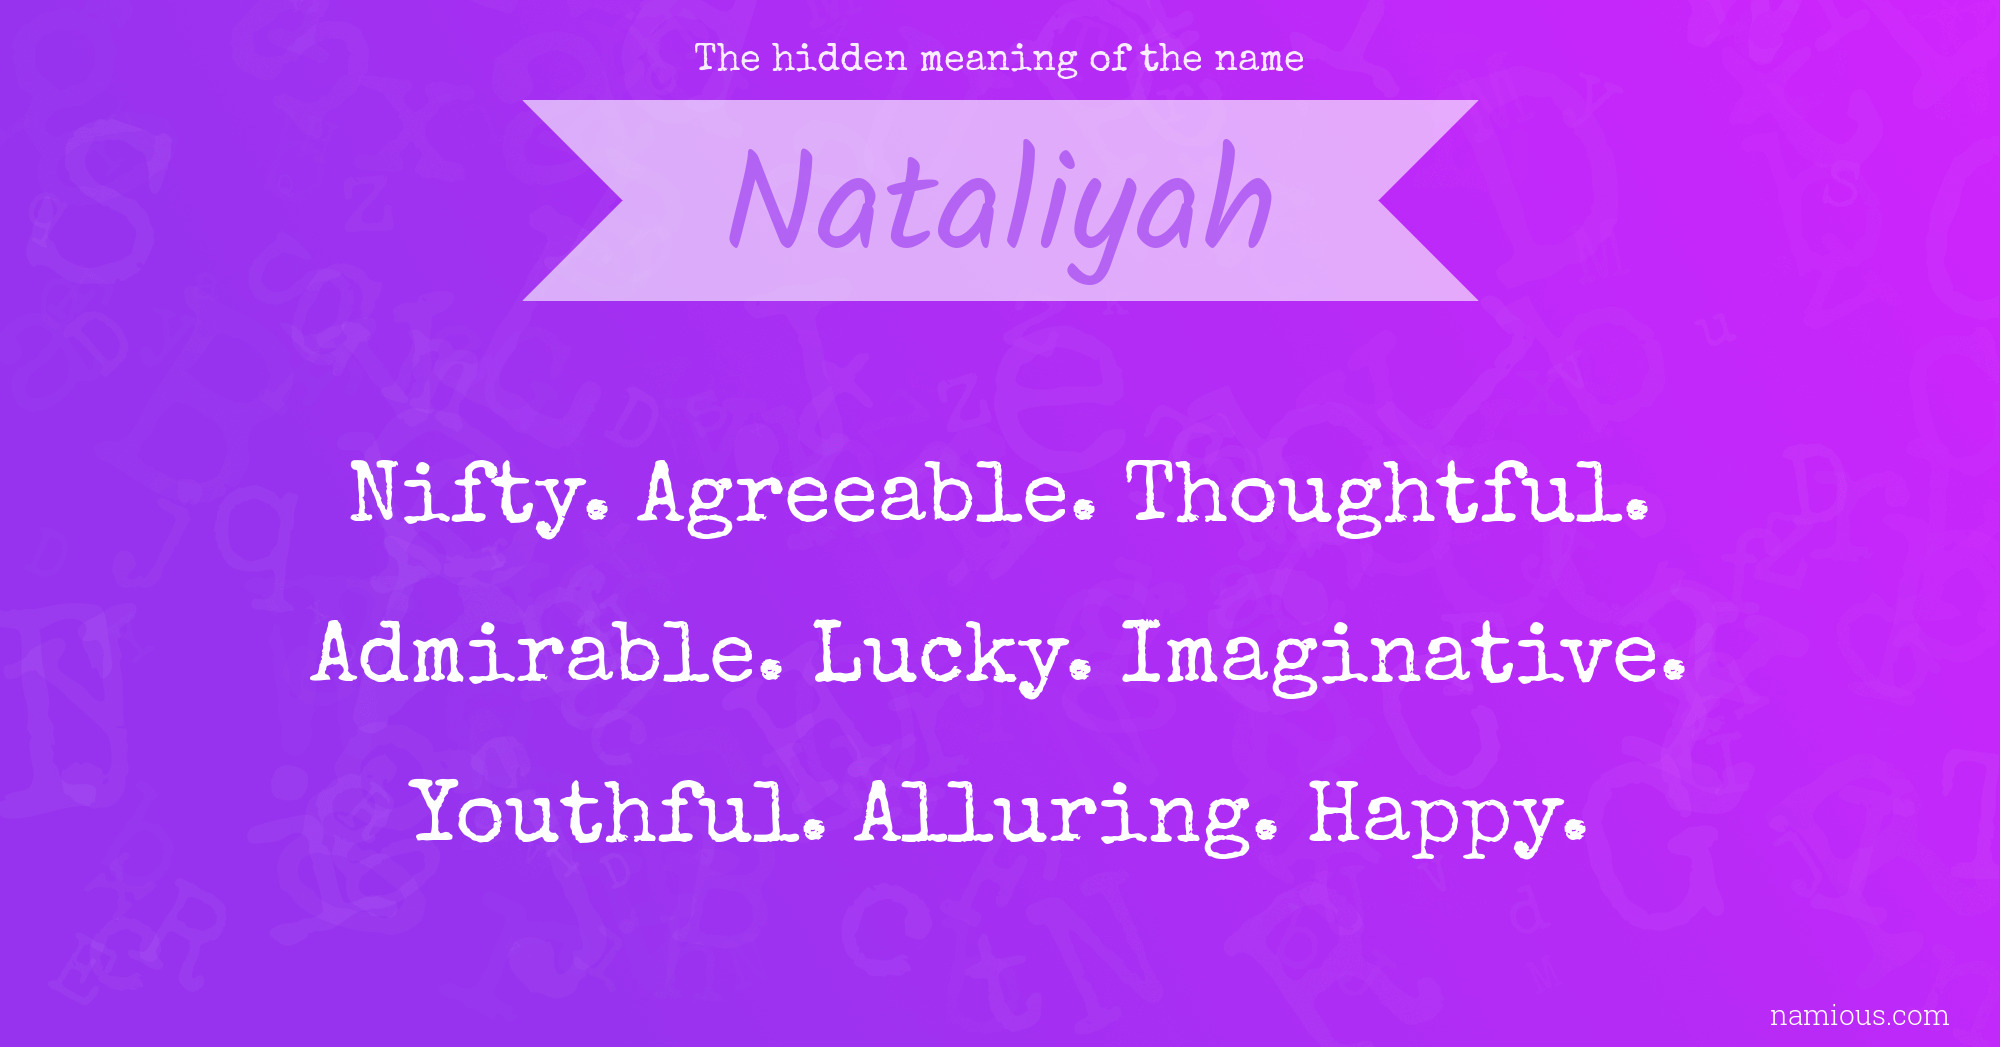 The hidden meaning of the name Nataliyah